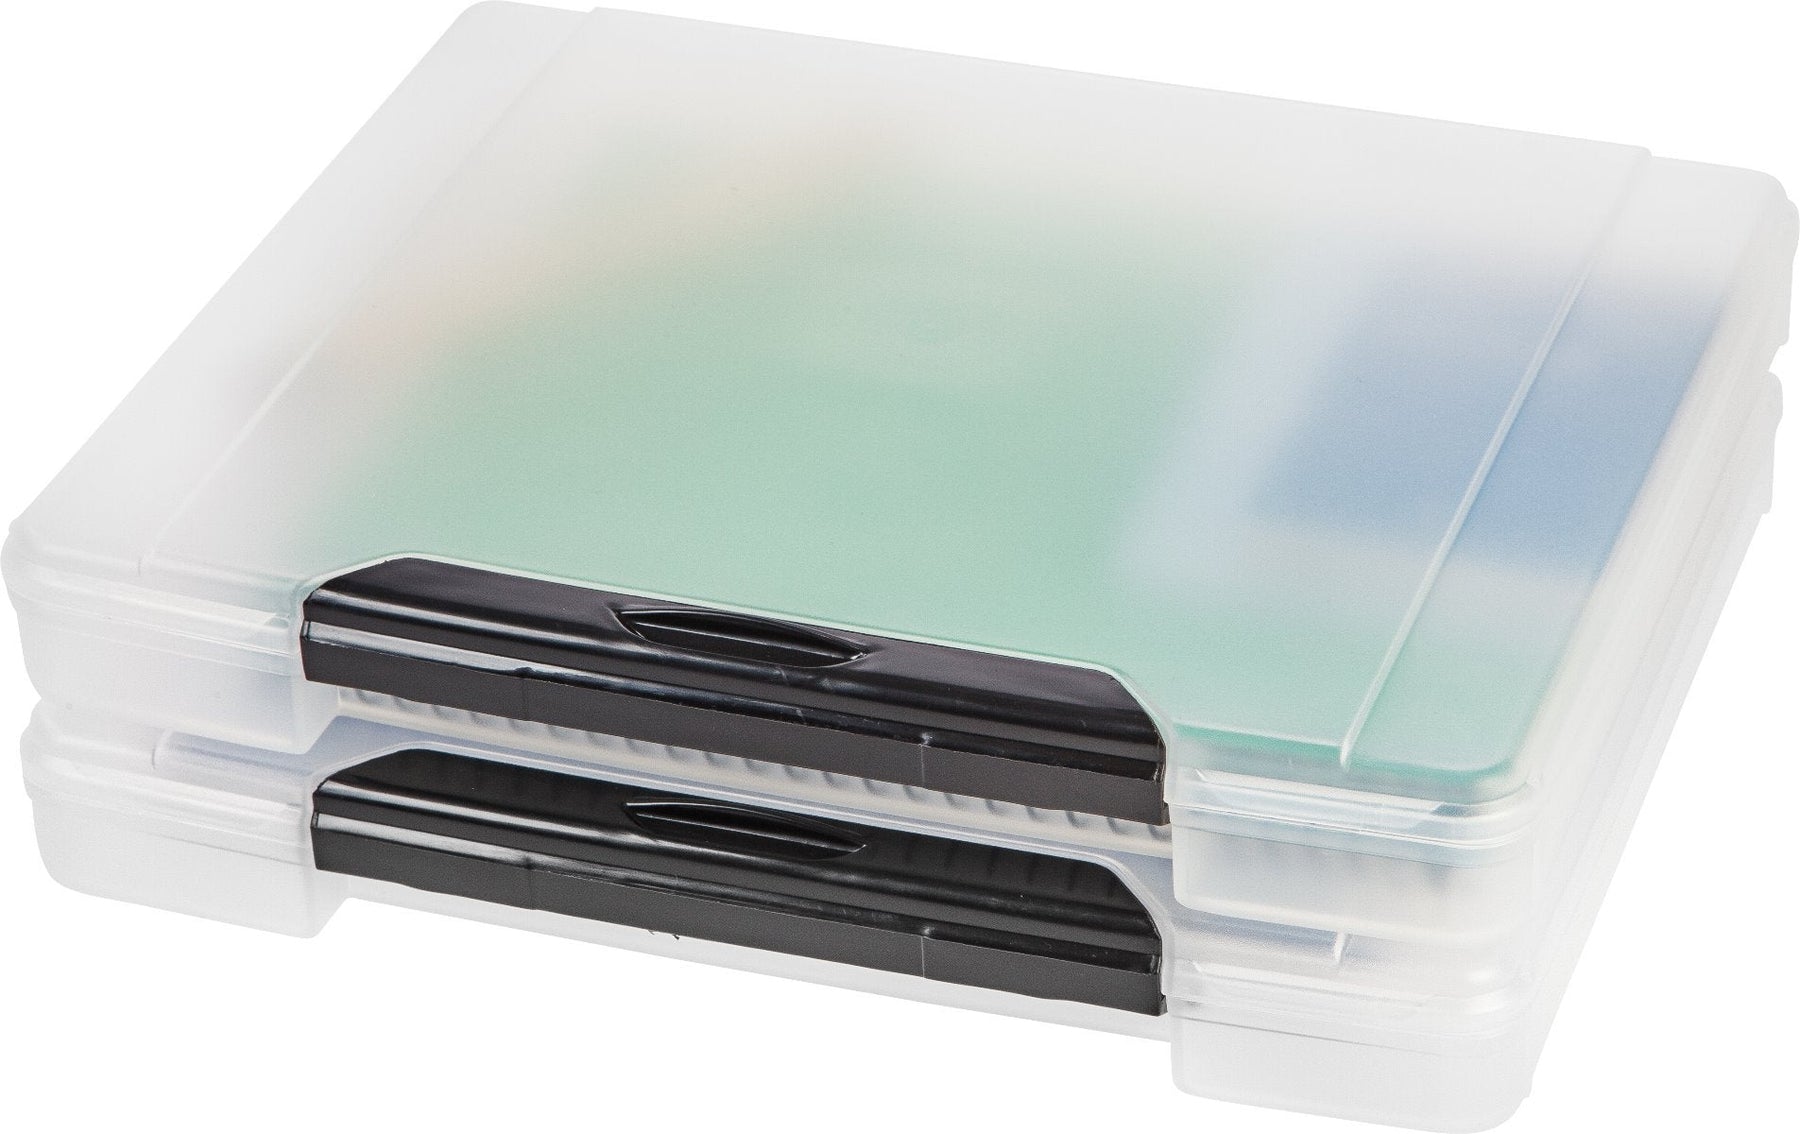 Portable Project Case in Clear (5-Pack)